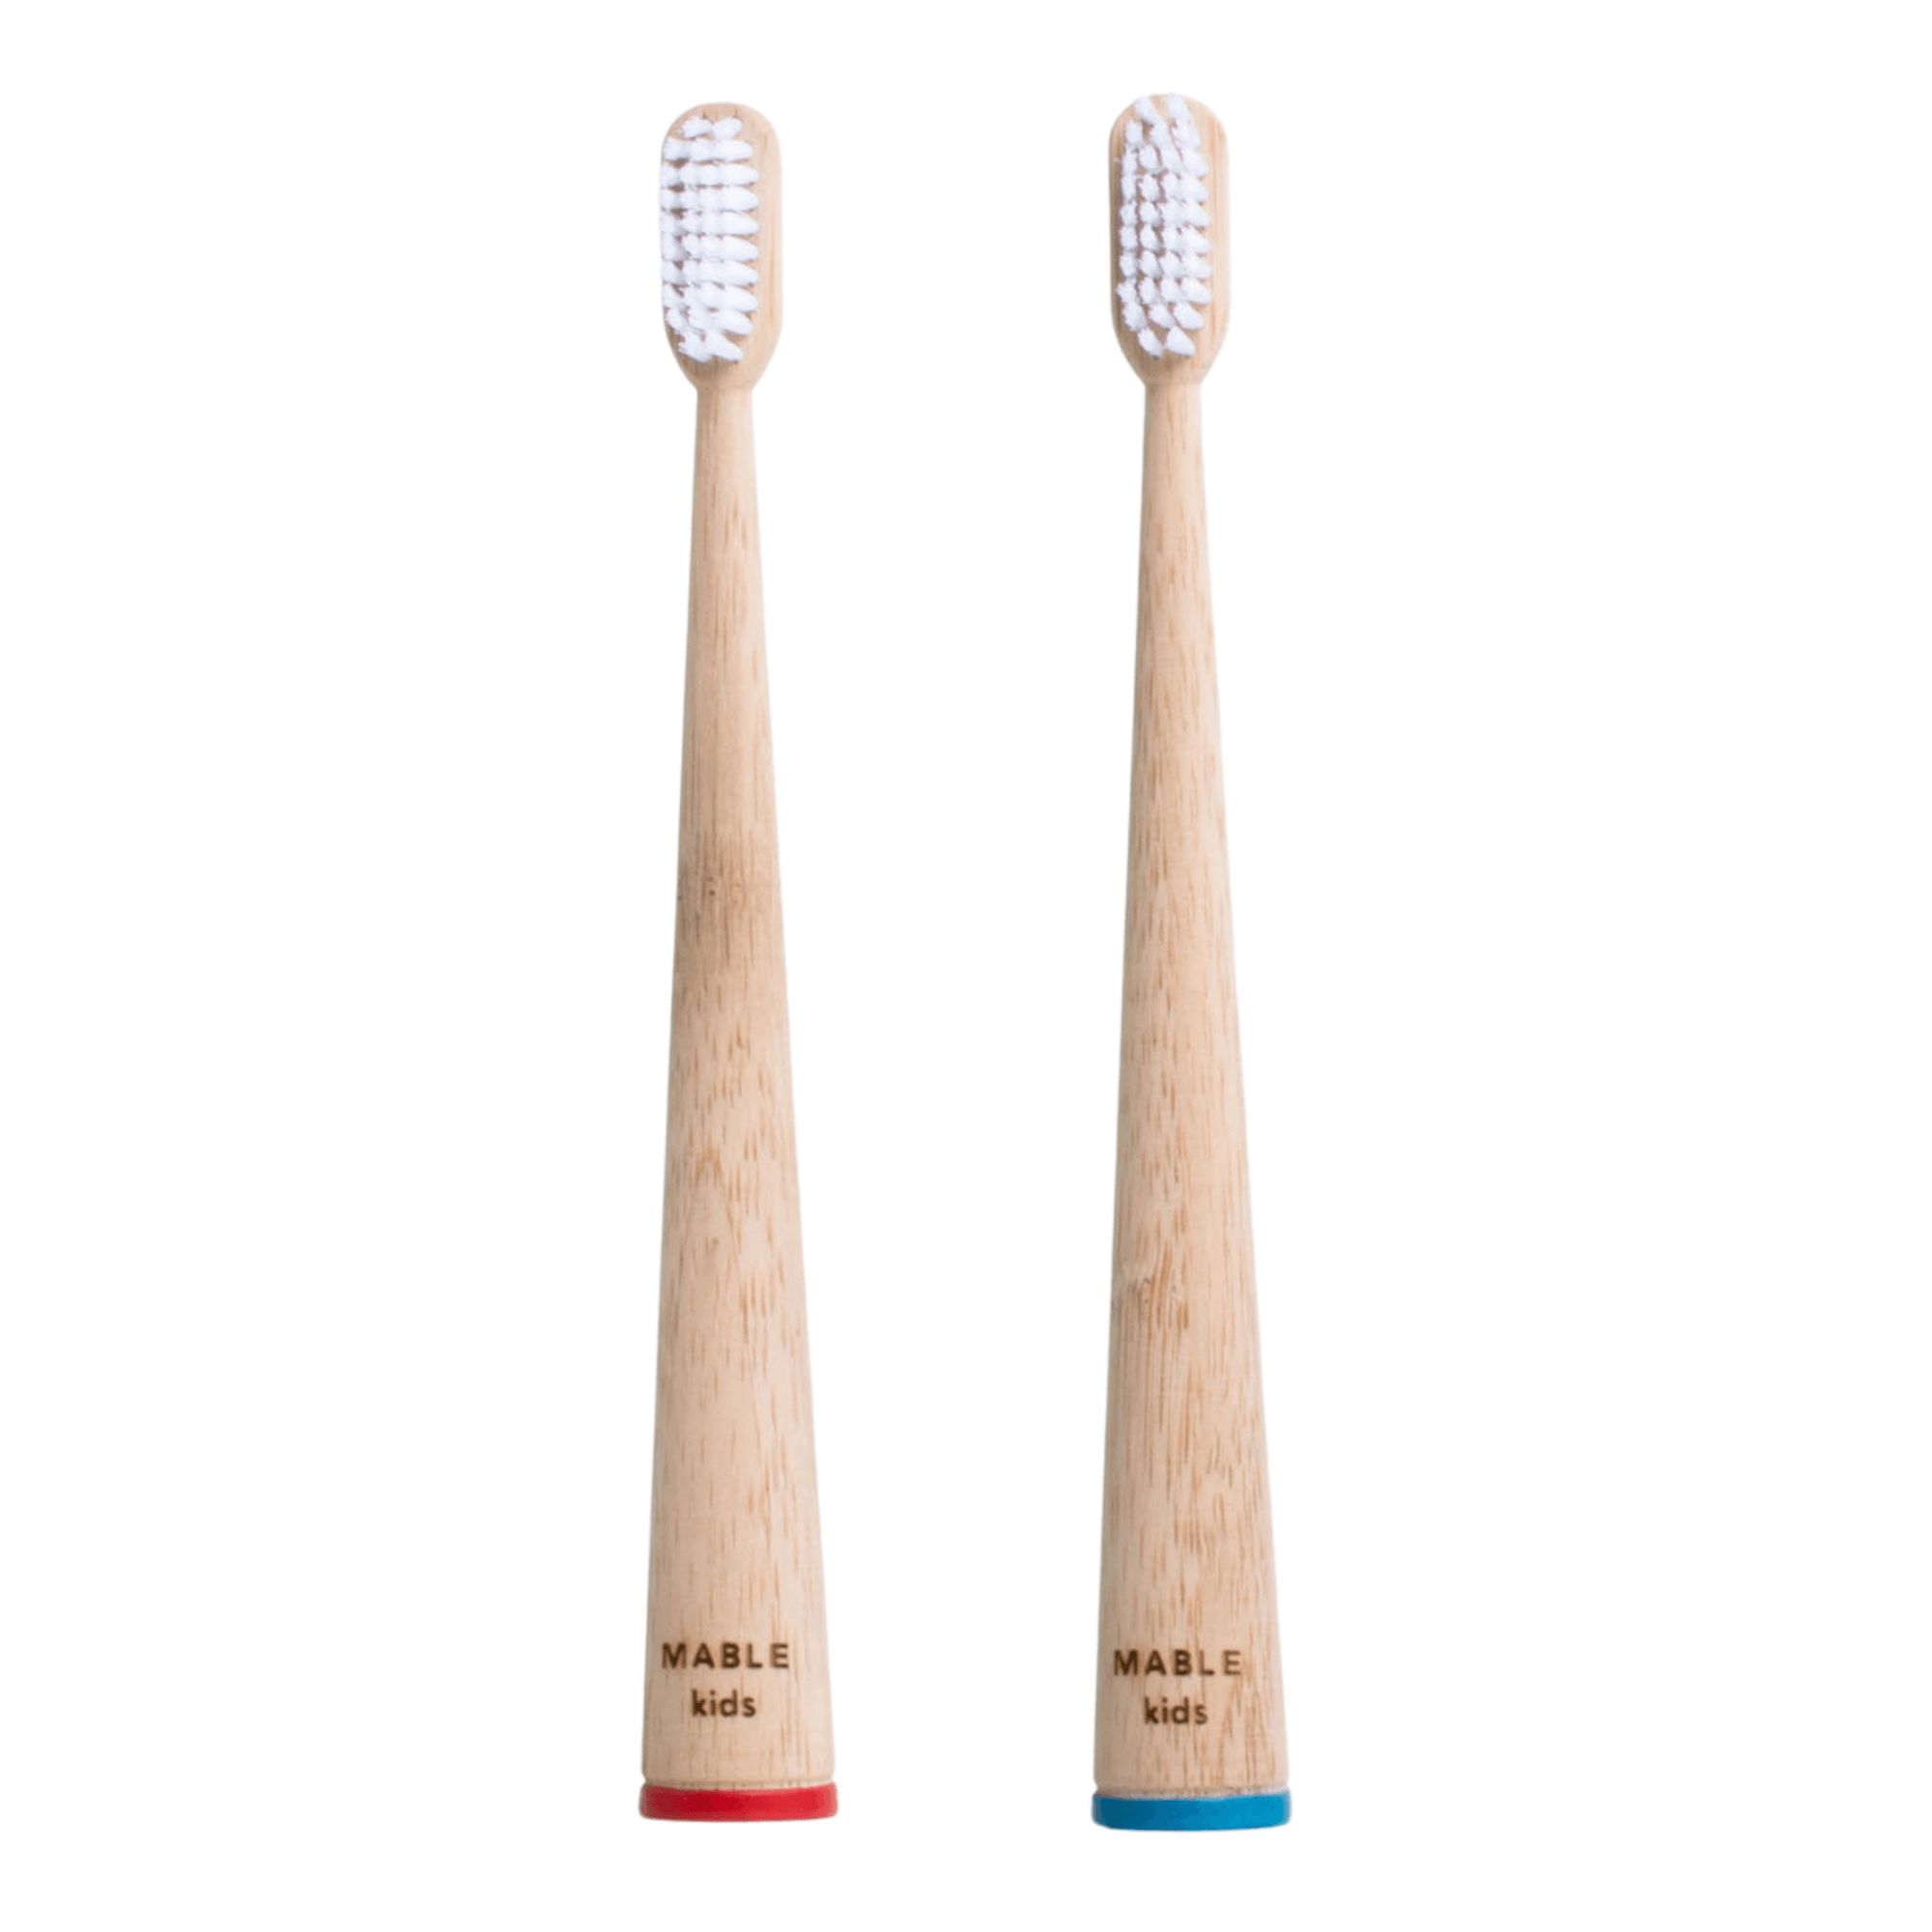 MABLE® self-standing toothbush 2 pack: 100% Compostable handles, 1 red and 1 blue toothbrushes printed with soy based inks. These self-standing toothbrushes will free you from plastic and unnecessary brush holders or clutter. Plastic-free packaging, Non-toxic and BPA-free Nylon® bristles.